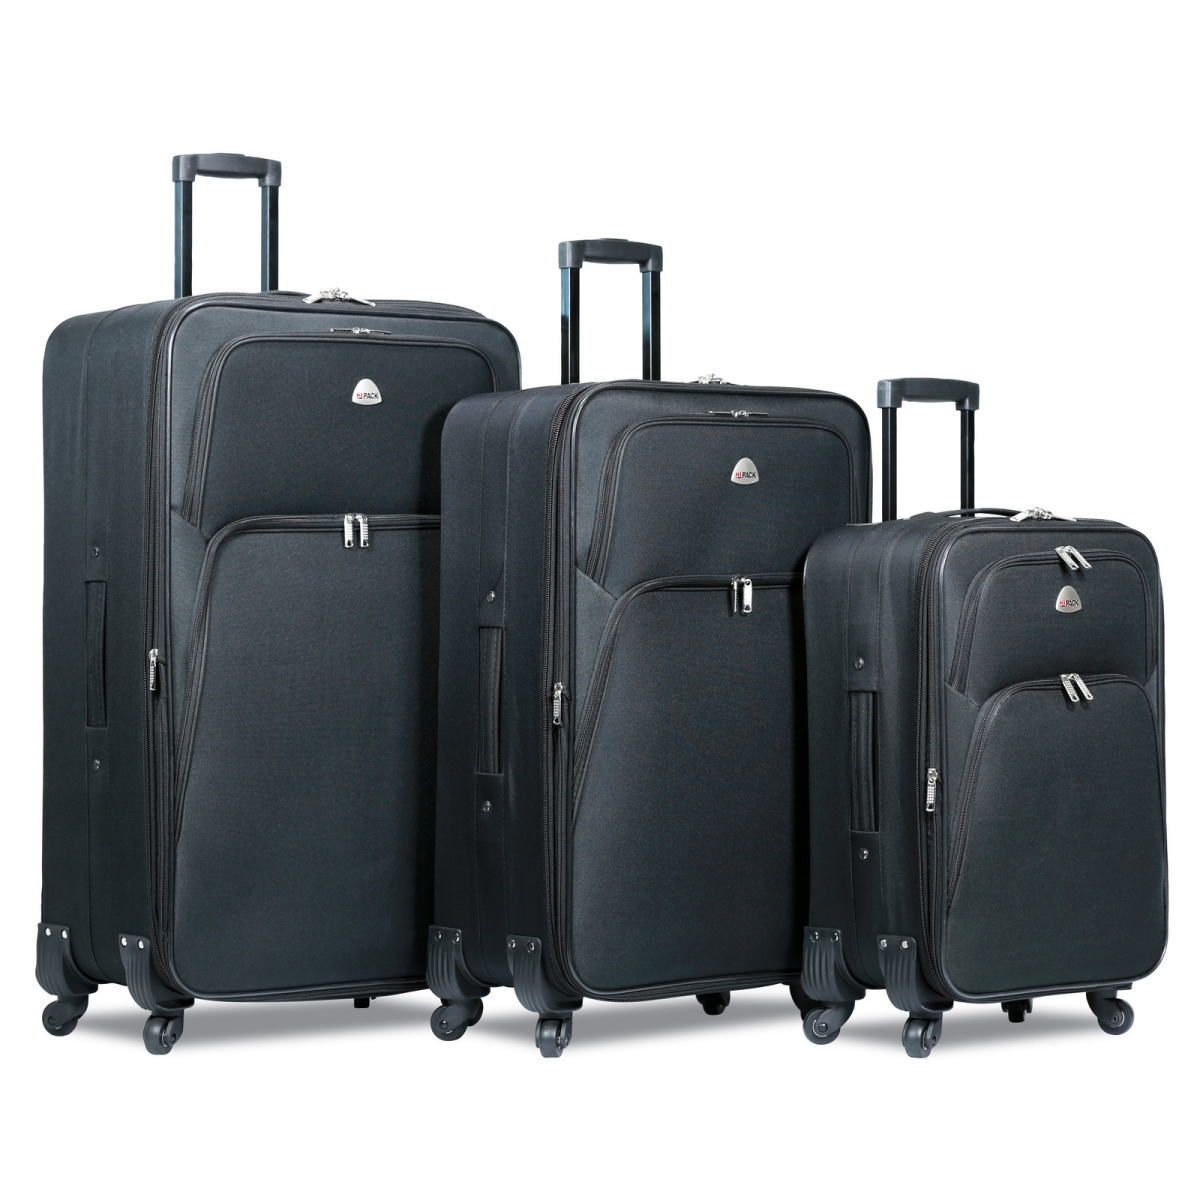 25hy-305-black Spinner Expandable Luggage Set - Black, 3 Piece